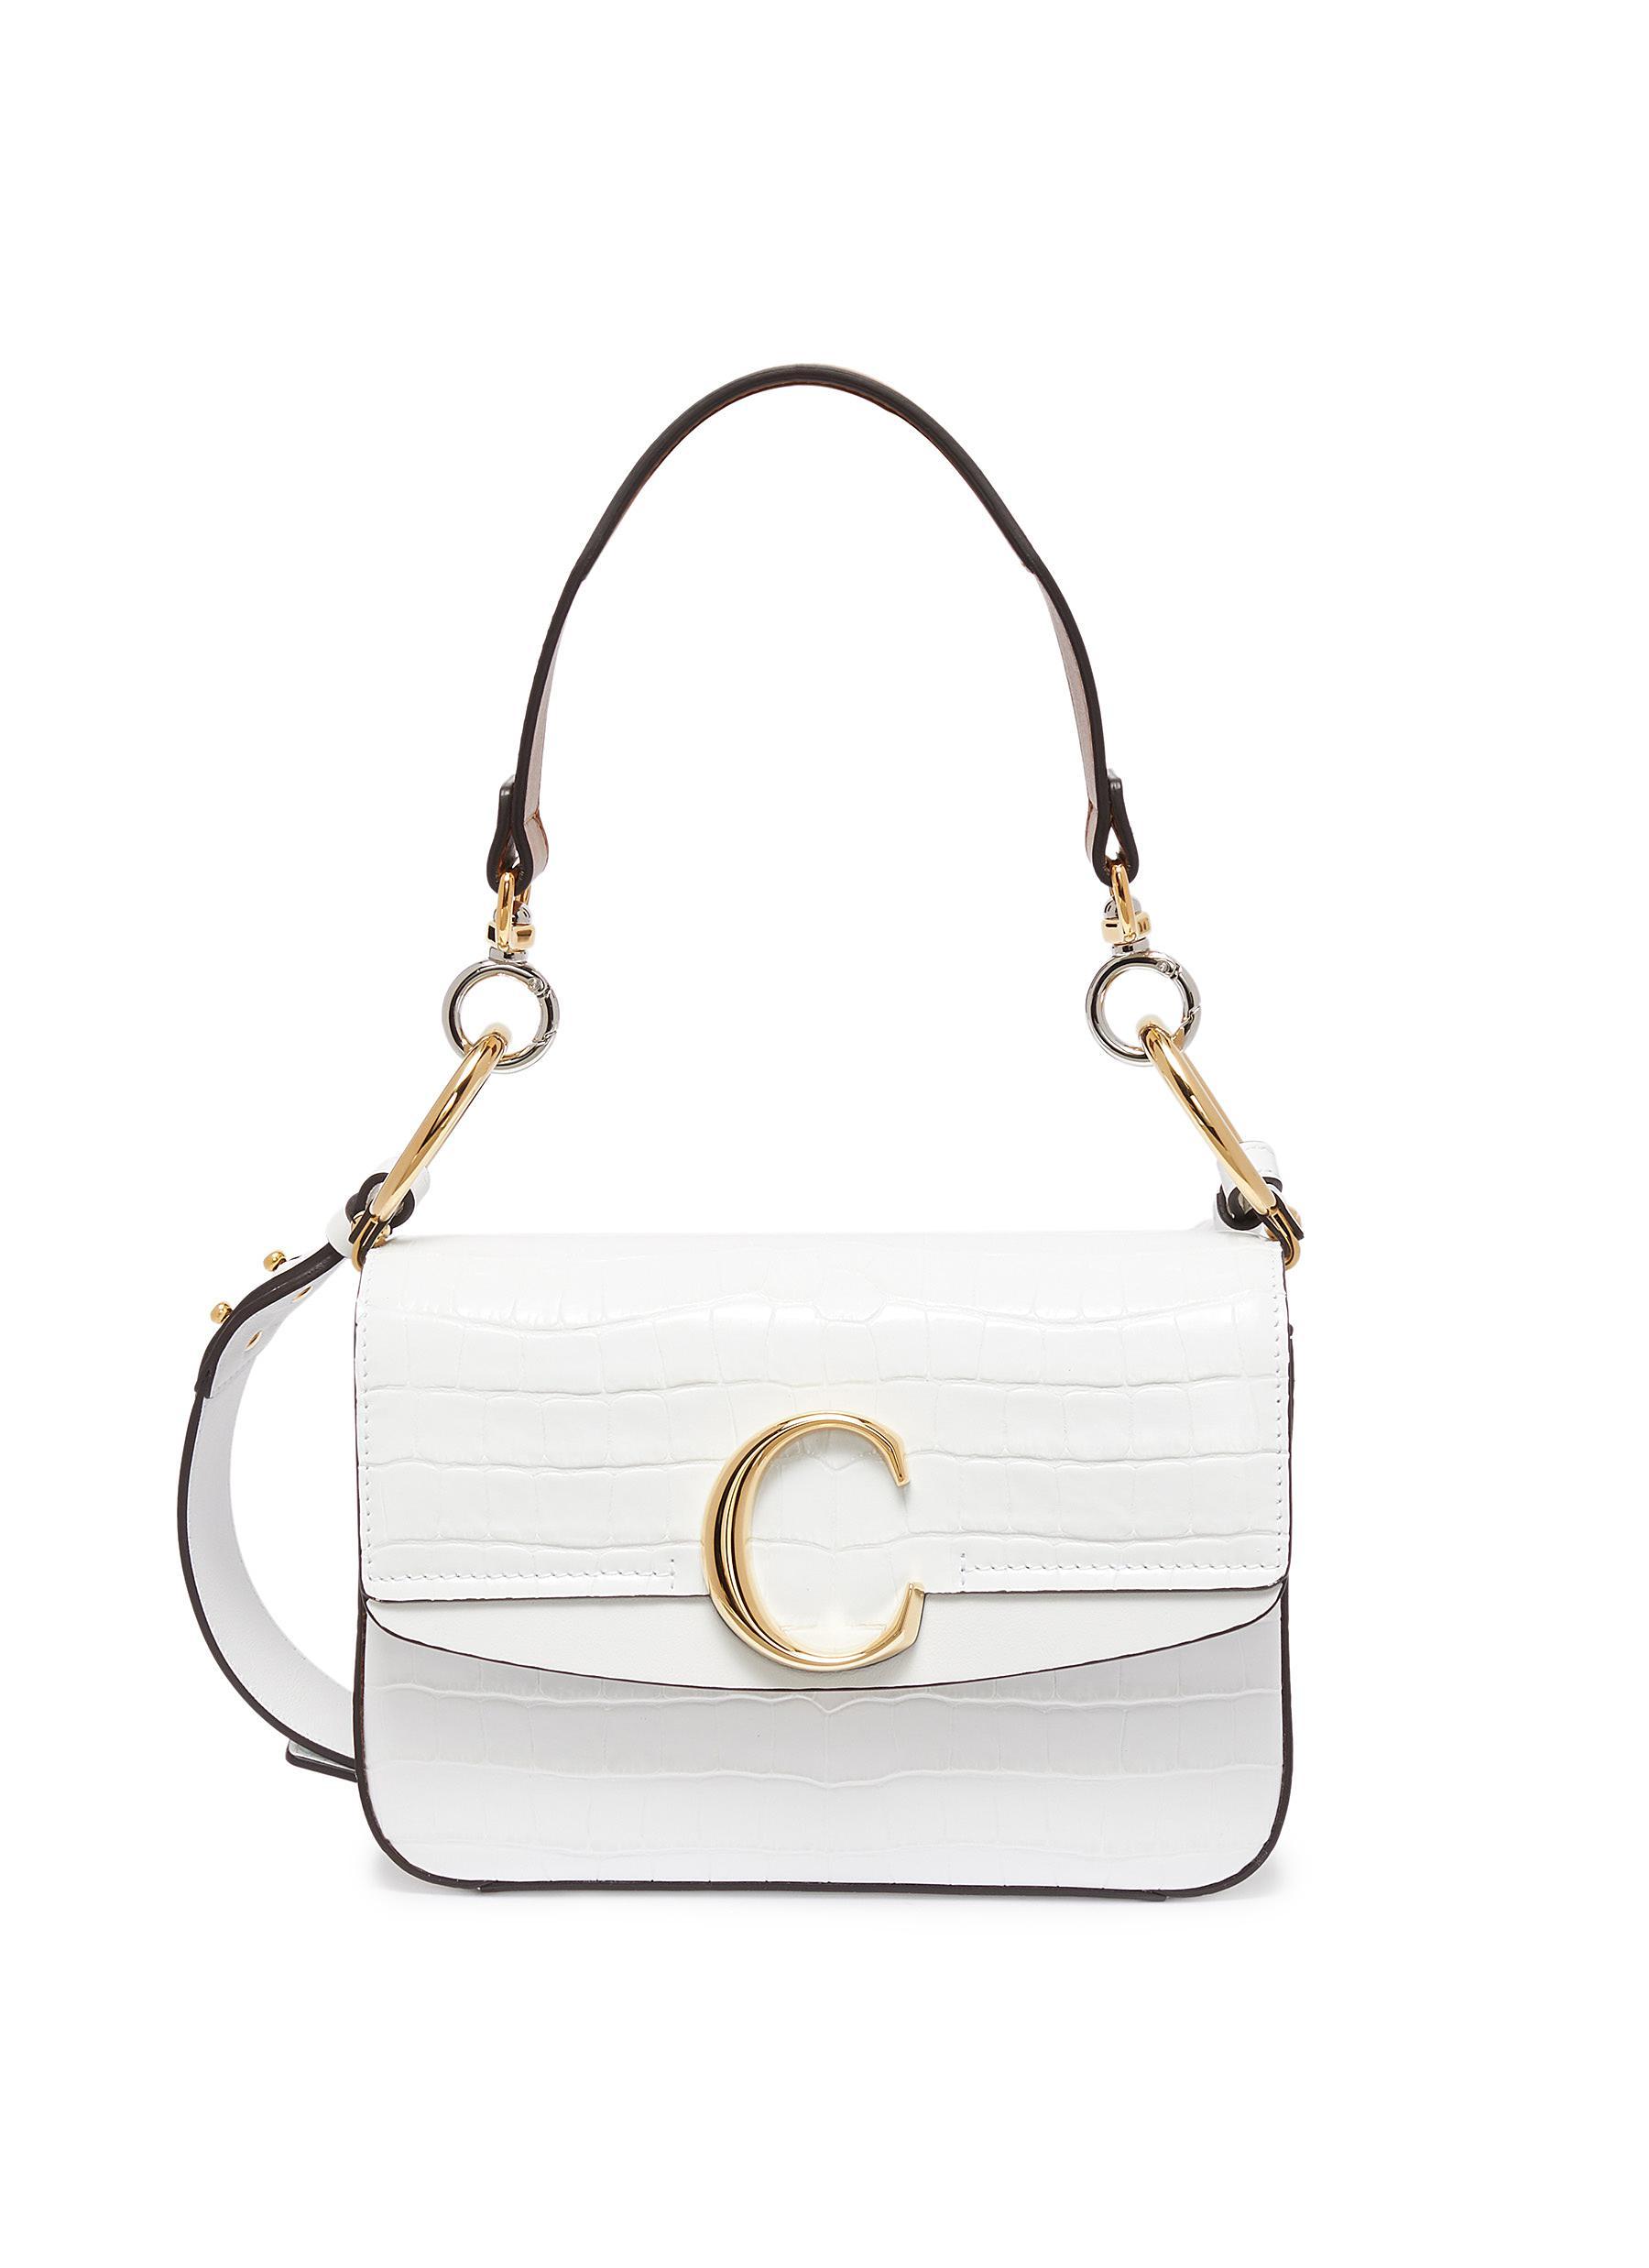 Chloé 'chloé C' Small Croc Embossed Leather Double Carry Bag in